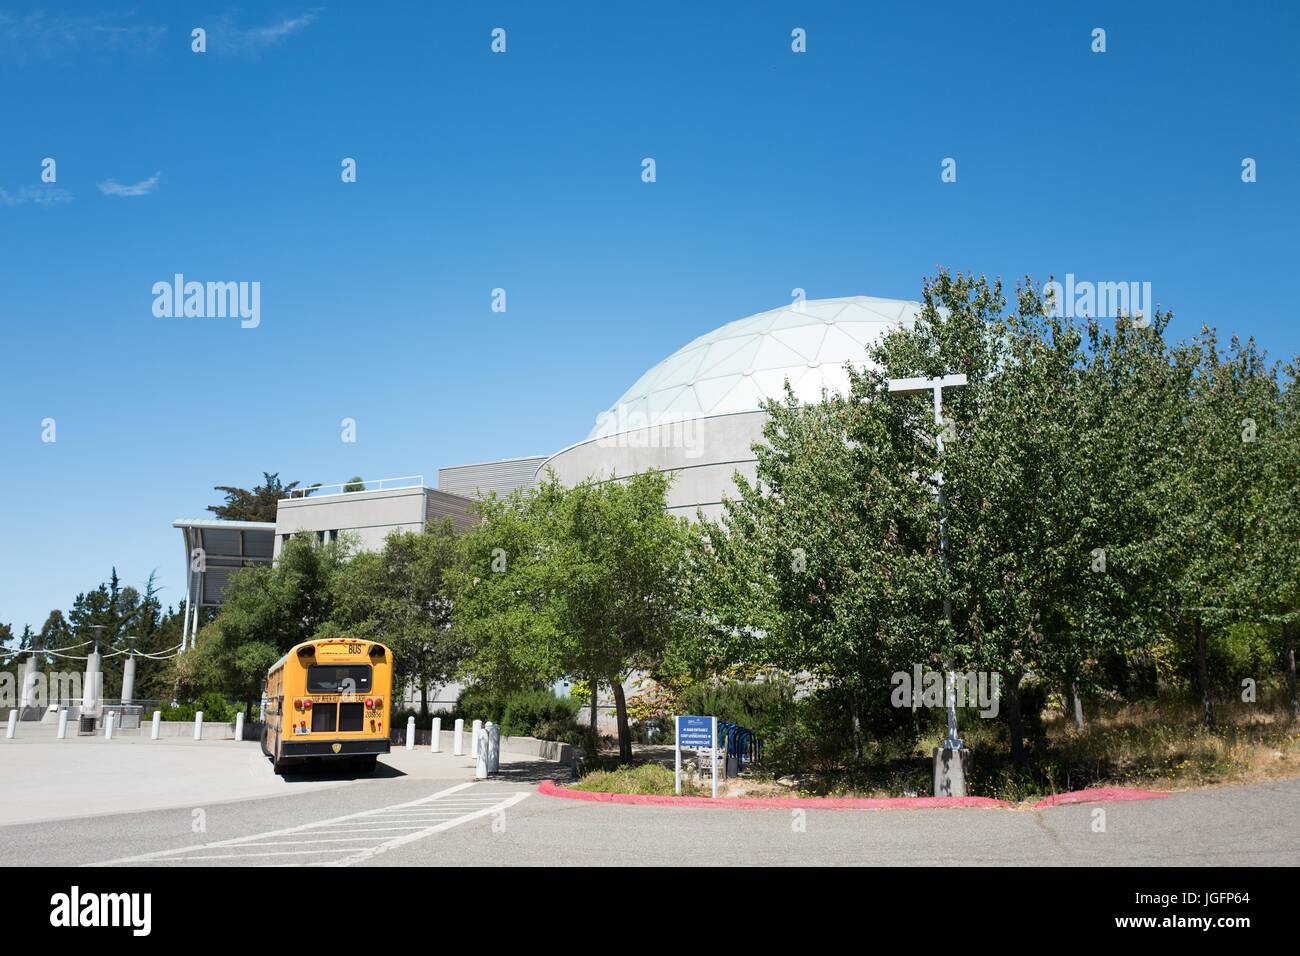 A school bus is parked in the circle at the Chabot Space and Science Center, a science museum and observatory in Oakland, California, June 15, 2017. Stock Photo